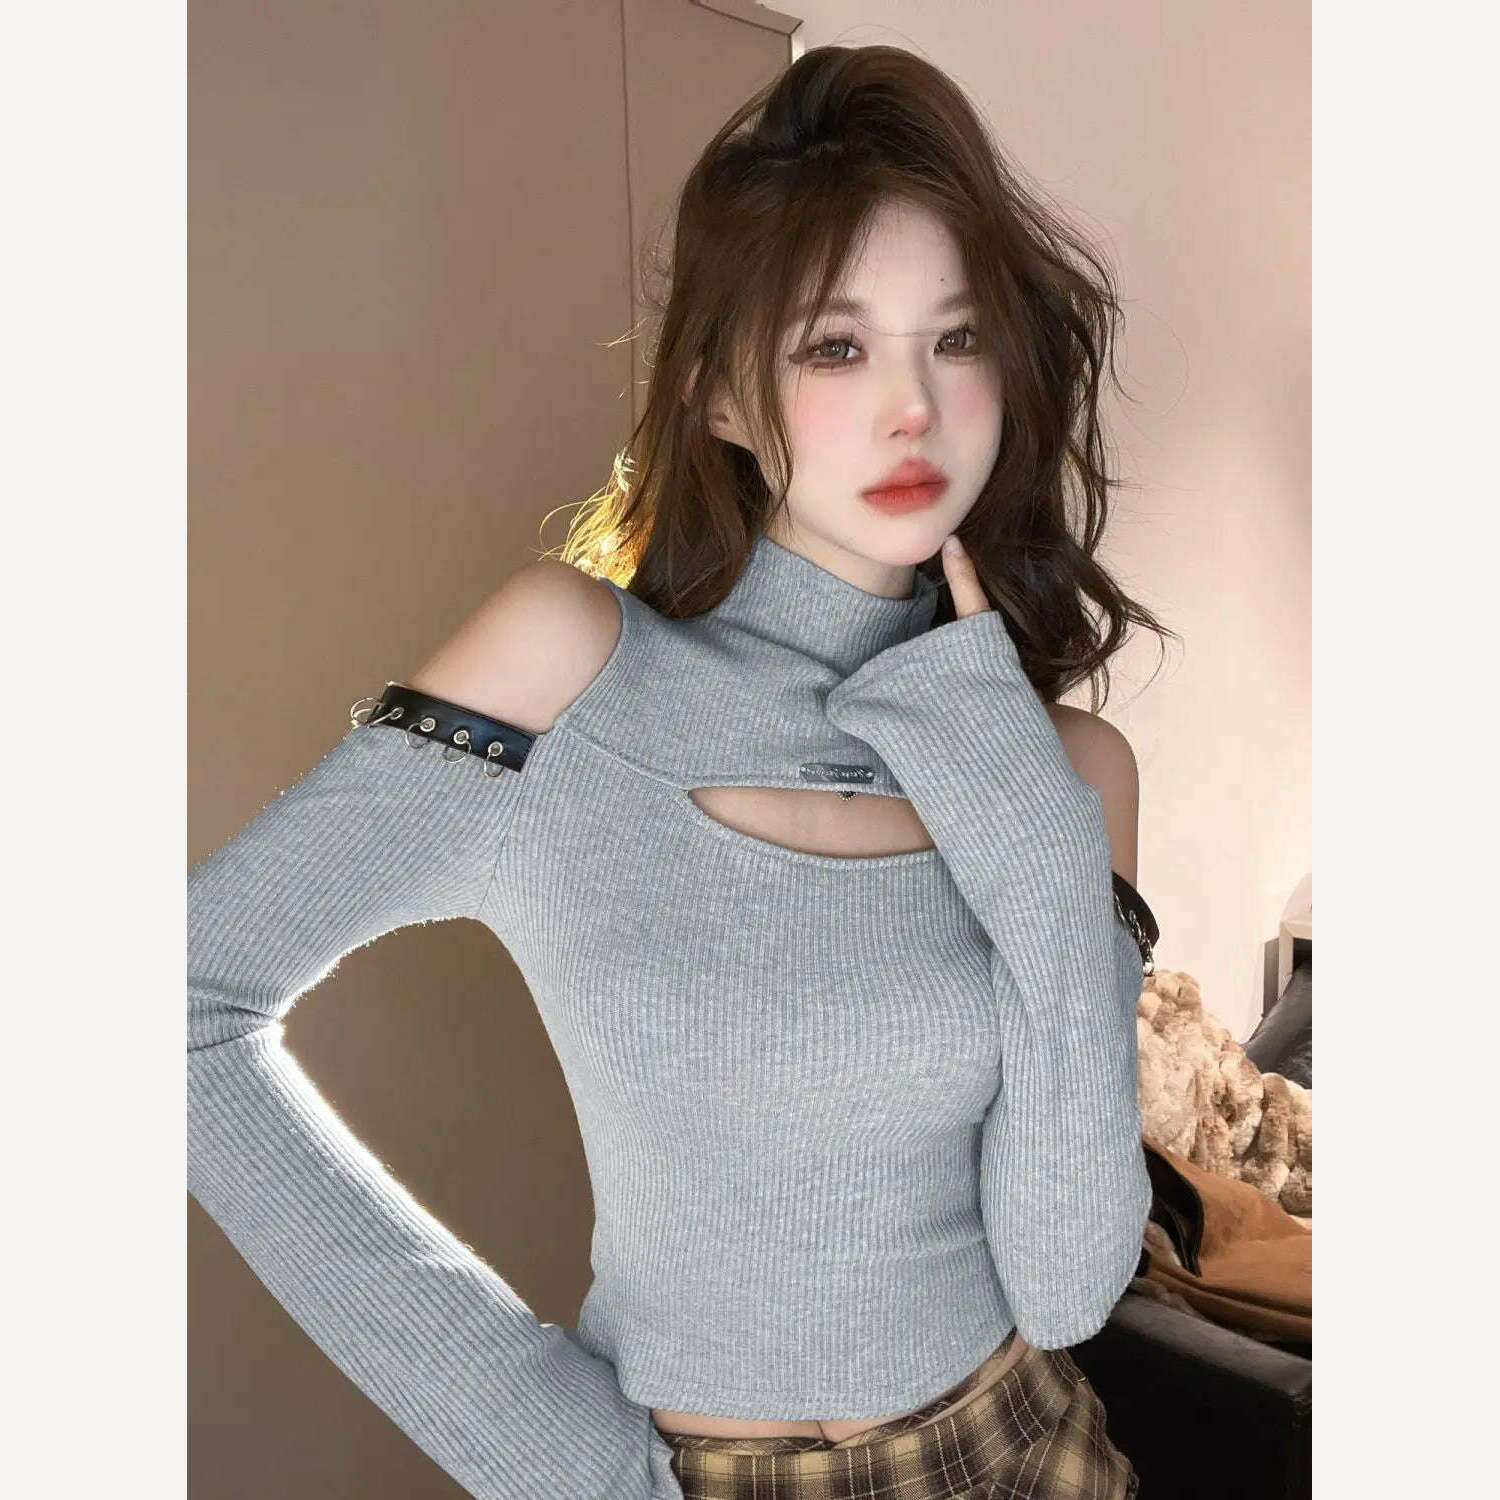 KIMLUD, Long Sleeve T-shirts Women Hollow Out Spliced Slim-fit Sexy Autumn Turtleneck All-match Off Shoulder Hot Girls Streetwear Soft, gray / S, KIMLUD Womens Clothes